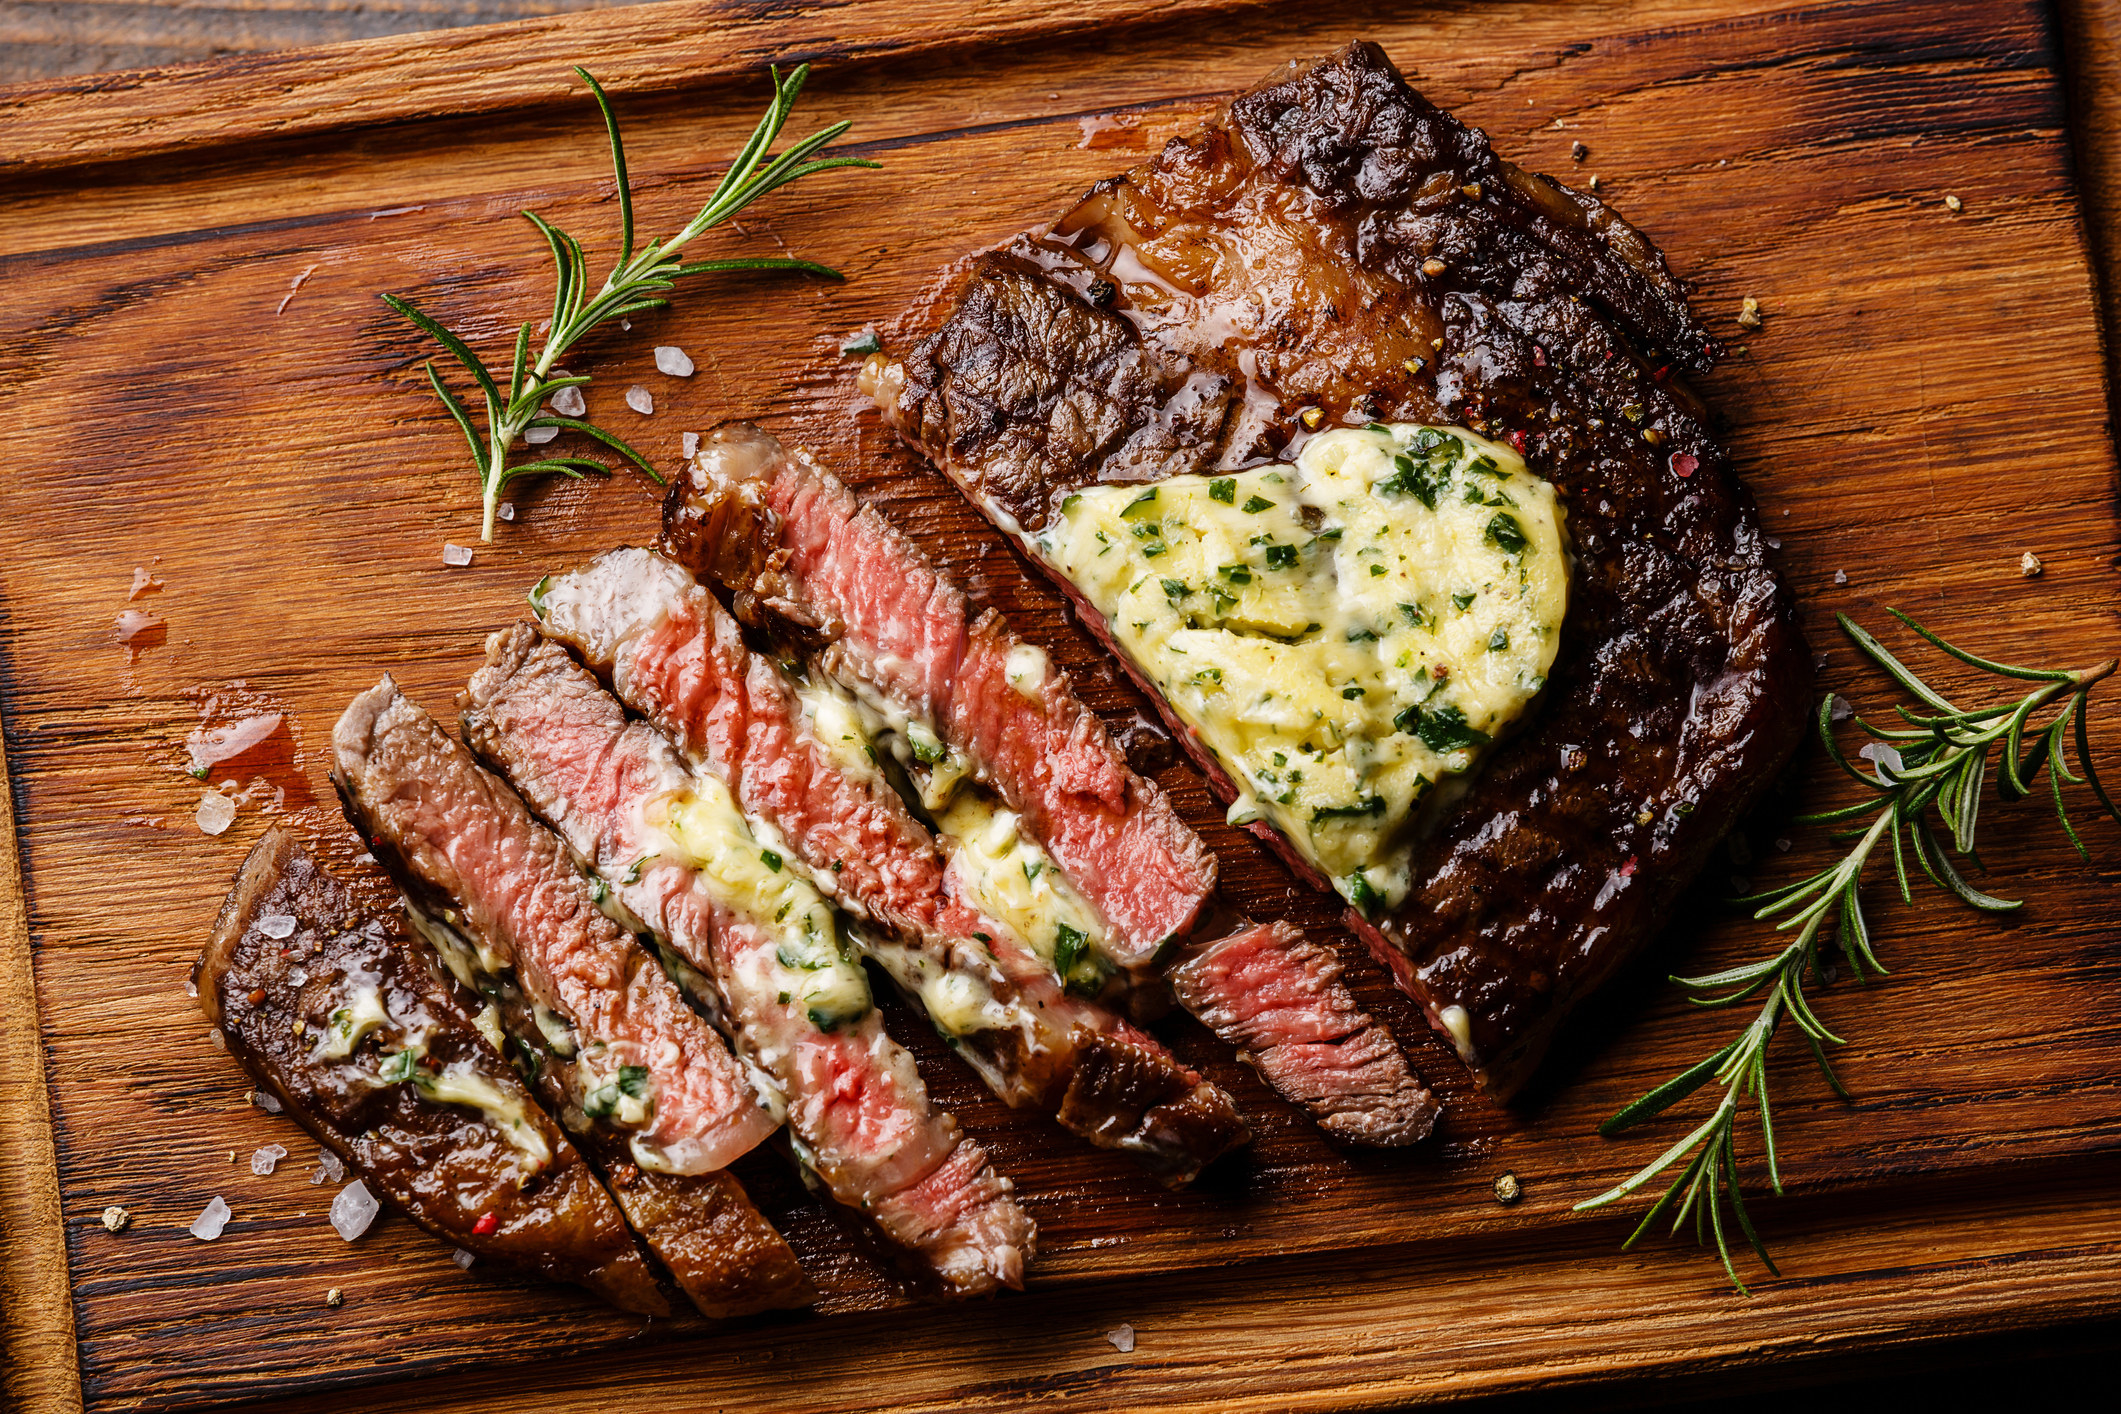 A ribeye steak topped with herb butter.